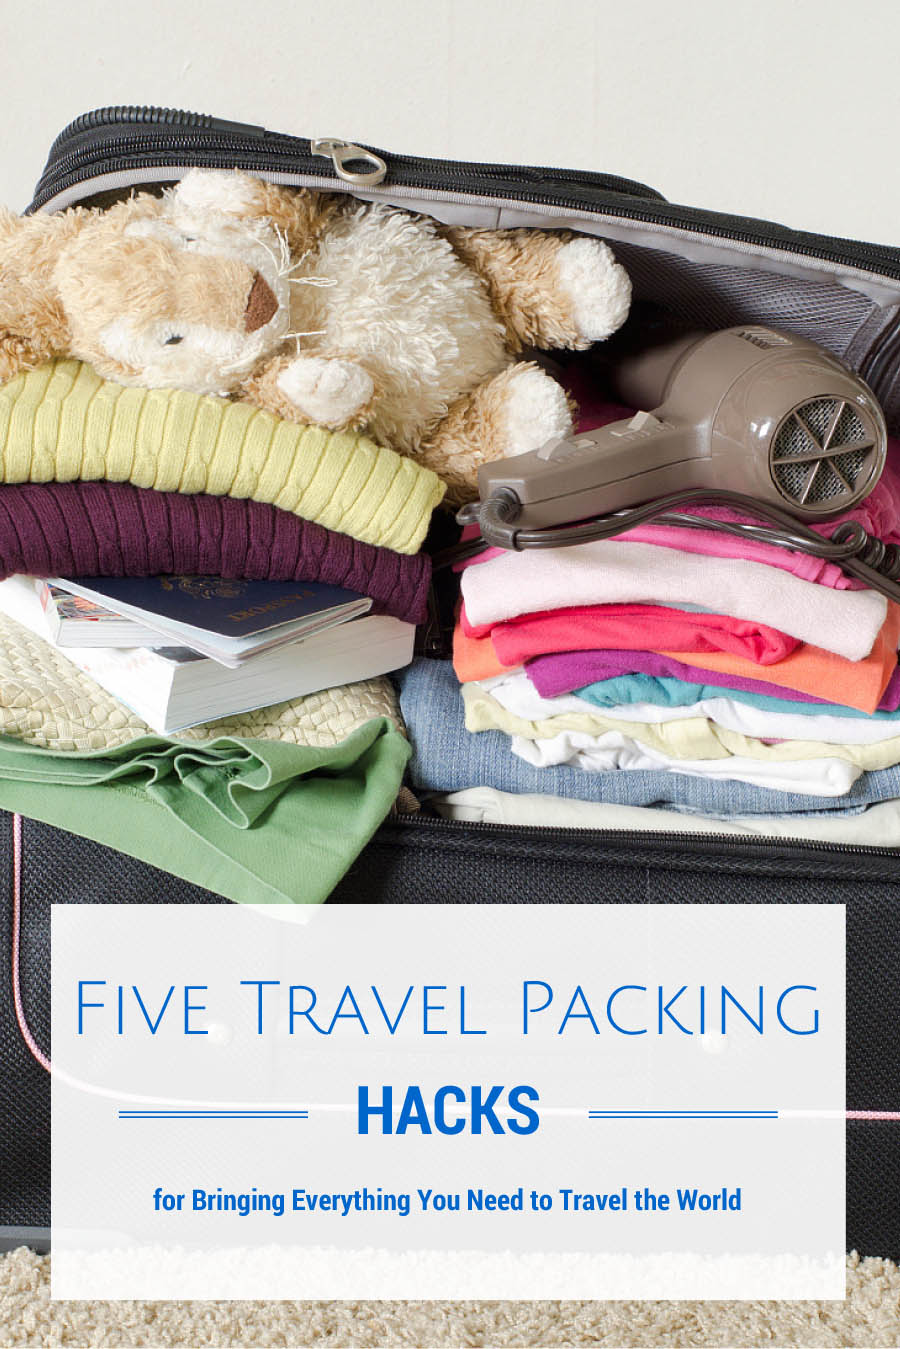 Five Travel Packing Hacks for Bringing Everything You Need to Travel the World